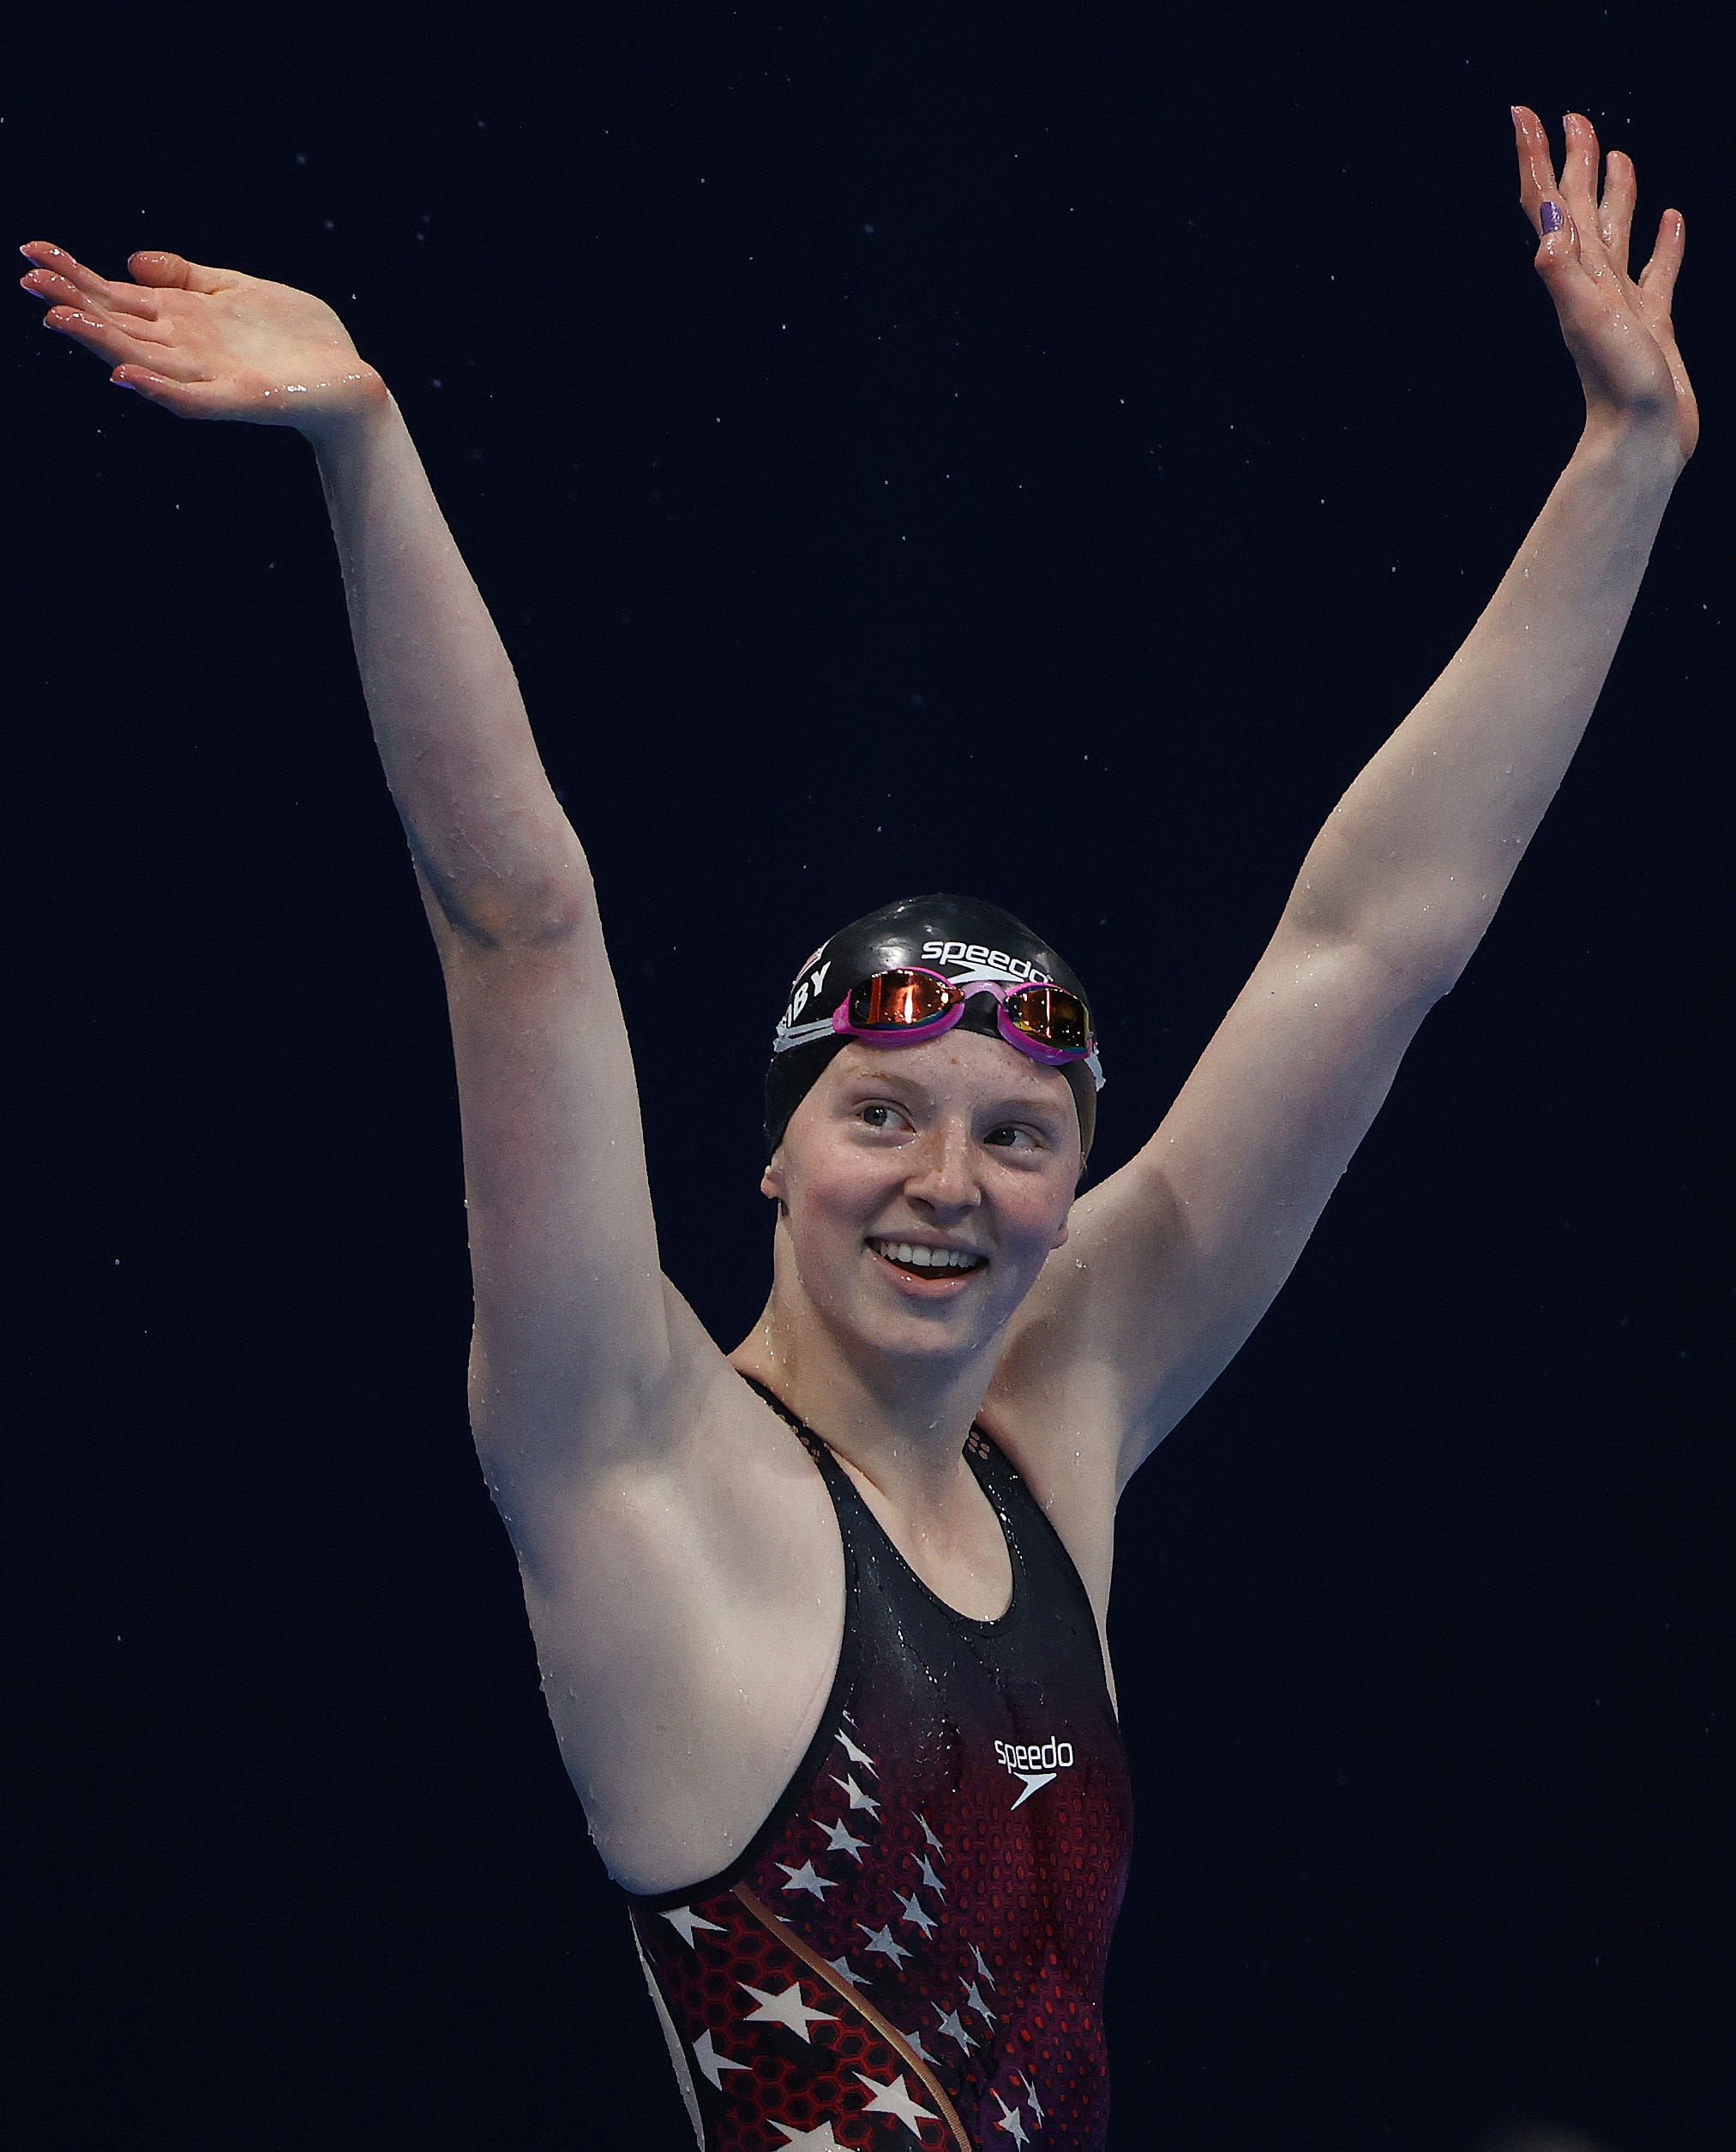 Lydia Jacoby is pictured waving to spectators after winning gold in the 100 meter breastroke final at the Tokyo Olympics.